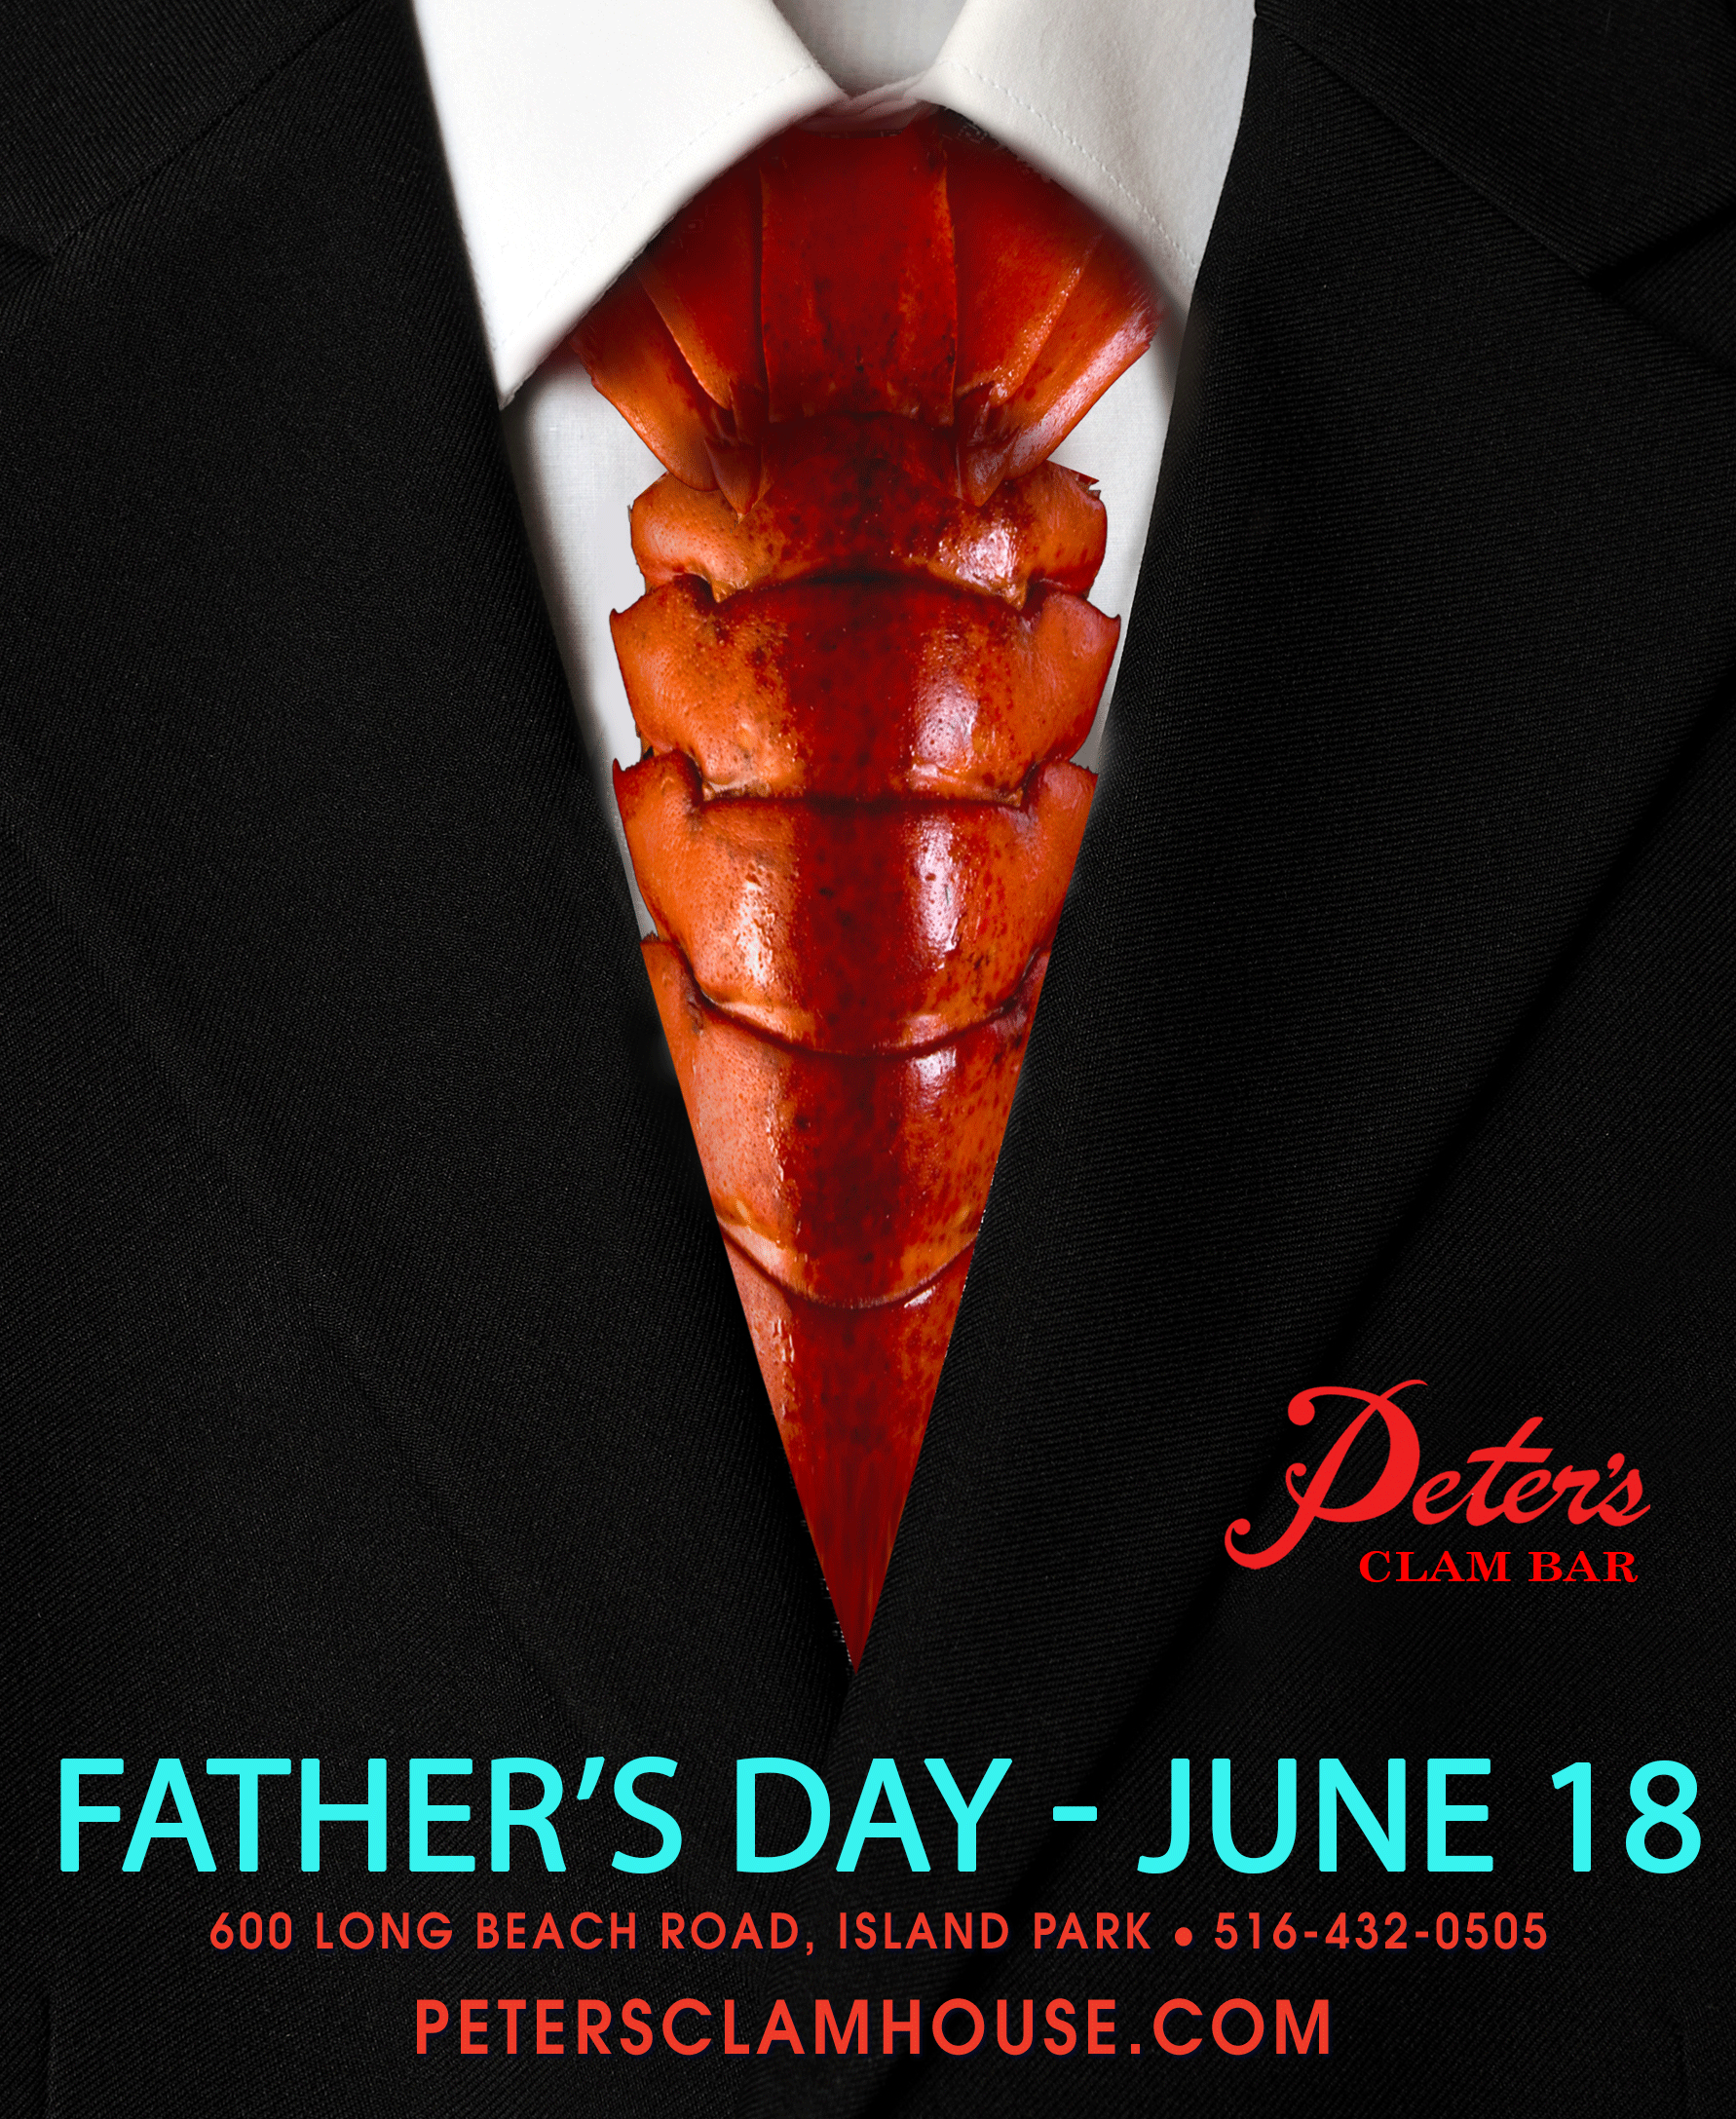 Peters Clam Bar Fathers Day